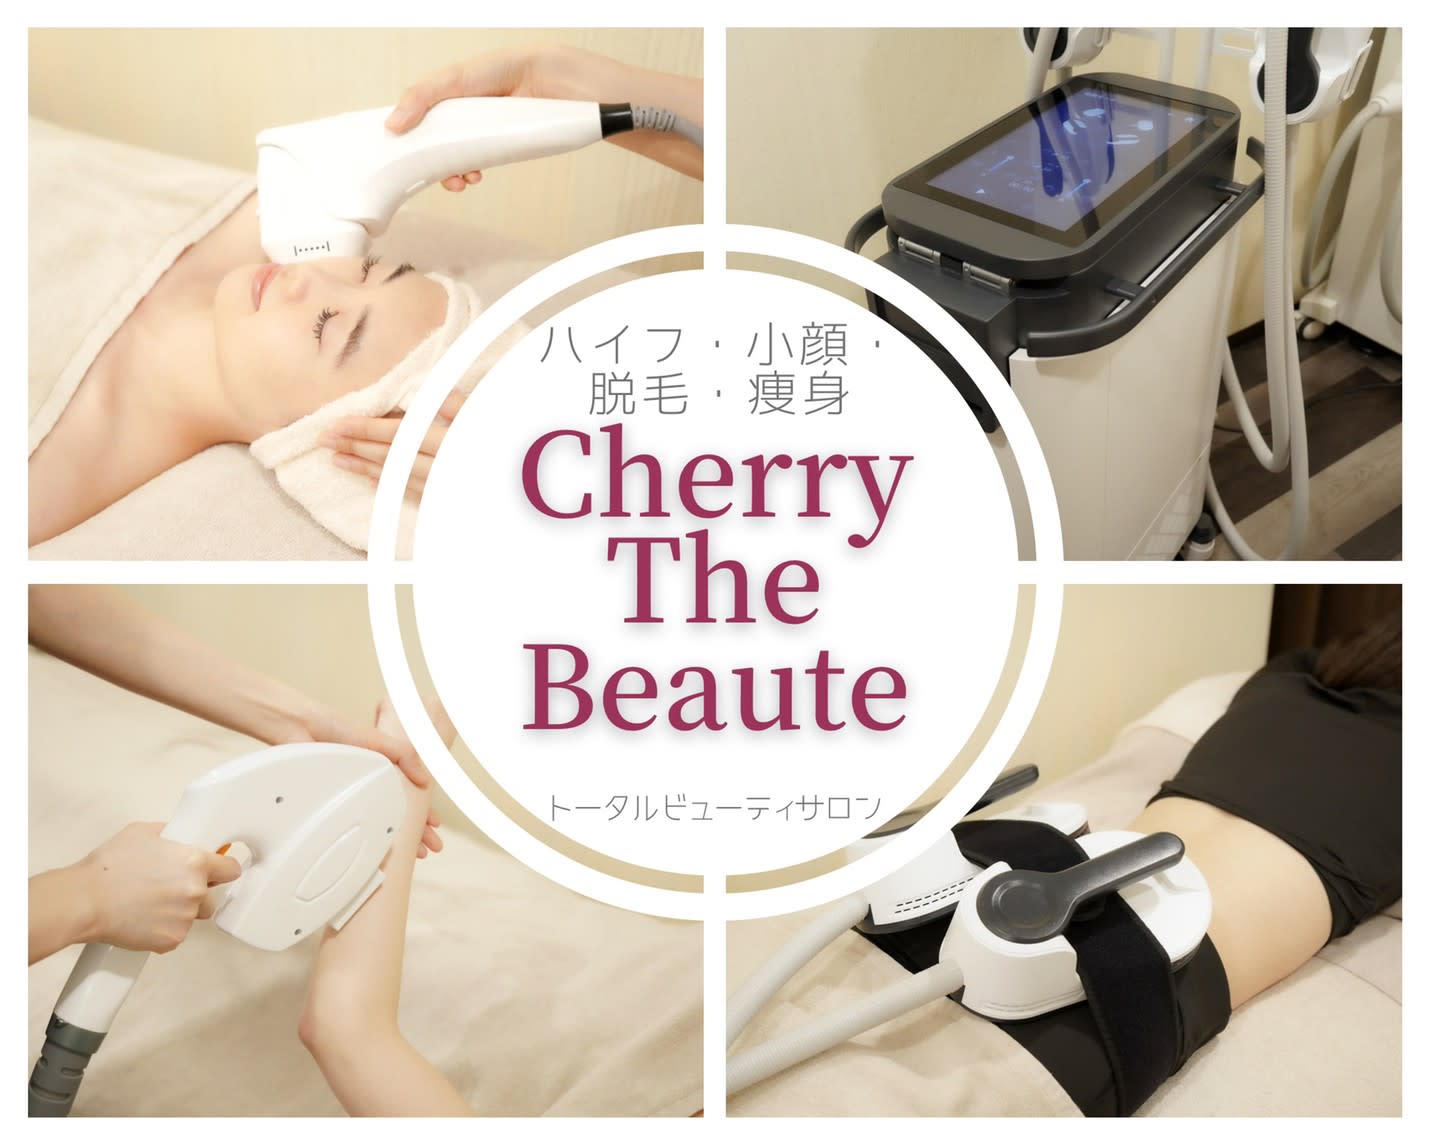 Cherry The Beaute パースィート目黒店のアイキャッチ画像